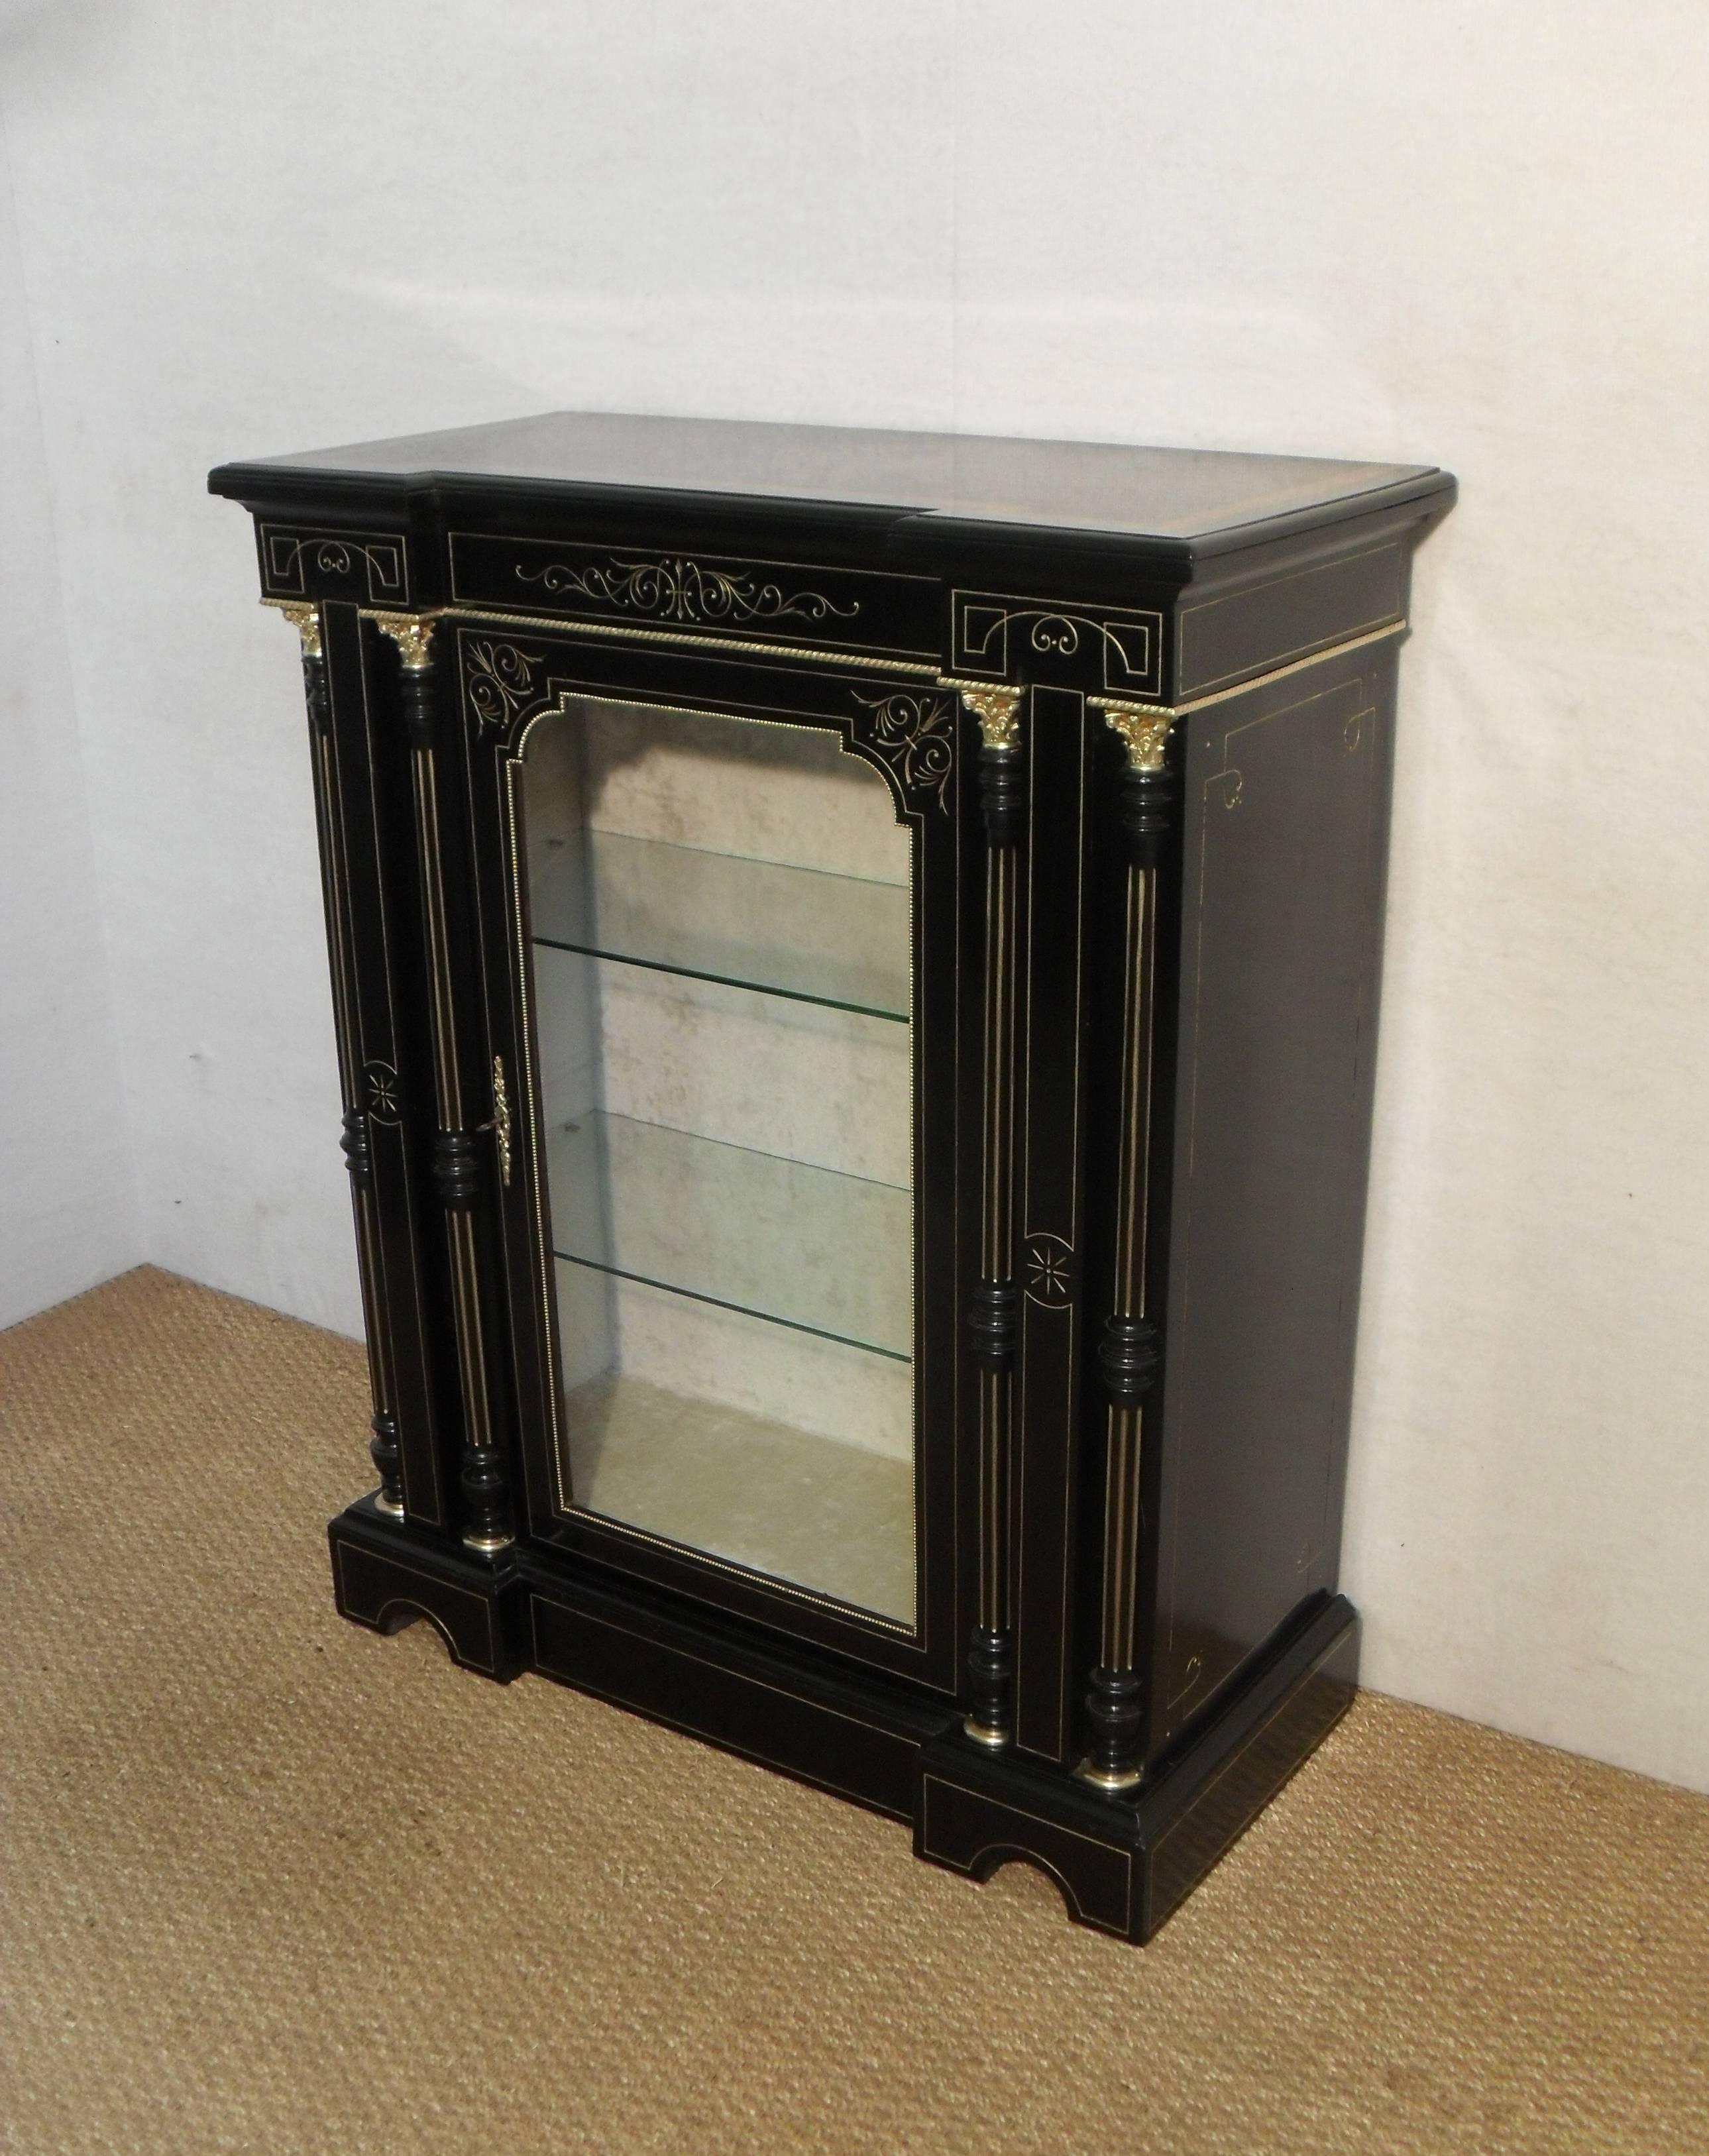 An exceptional quality and stylish pair of Victorian Aesthetic movement inverted break front ebonised pier display cabinets or bookcases. The cabinets have carved gilded decoration with two half turned fluted gilded columns to each side with bronze